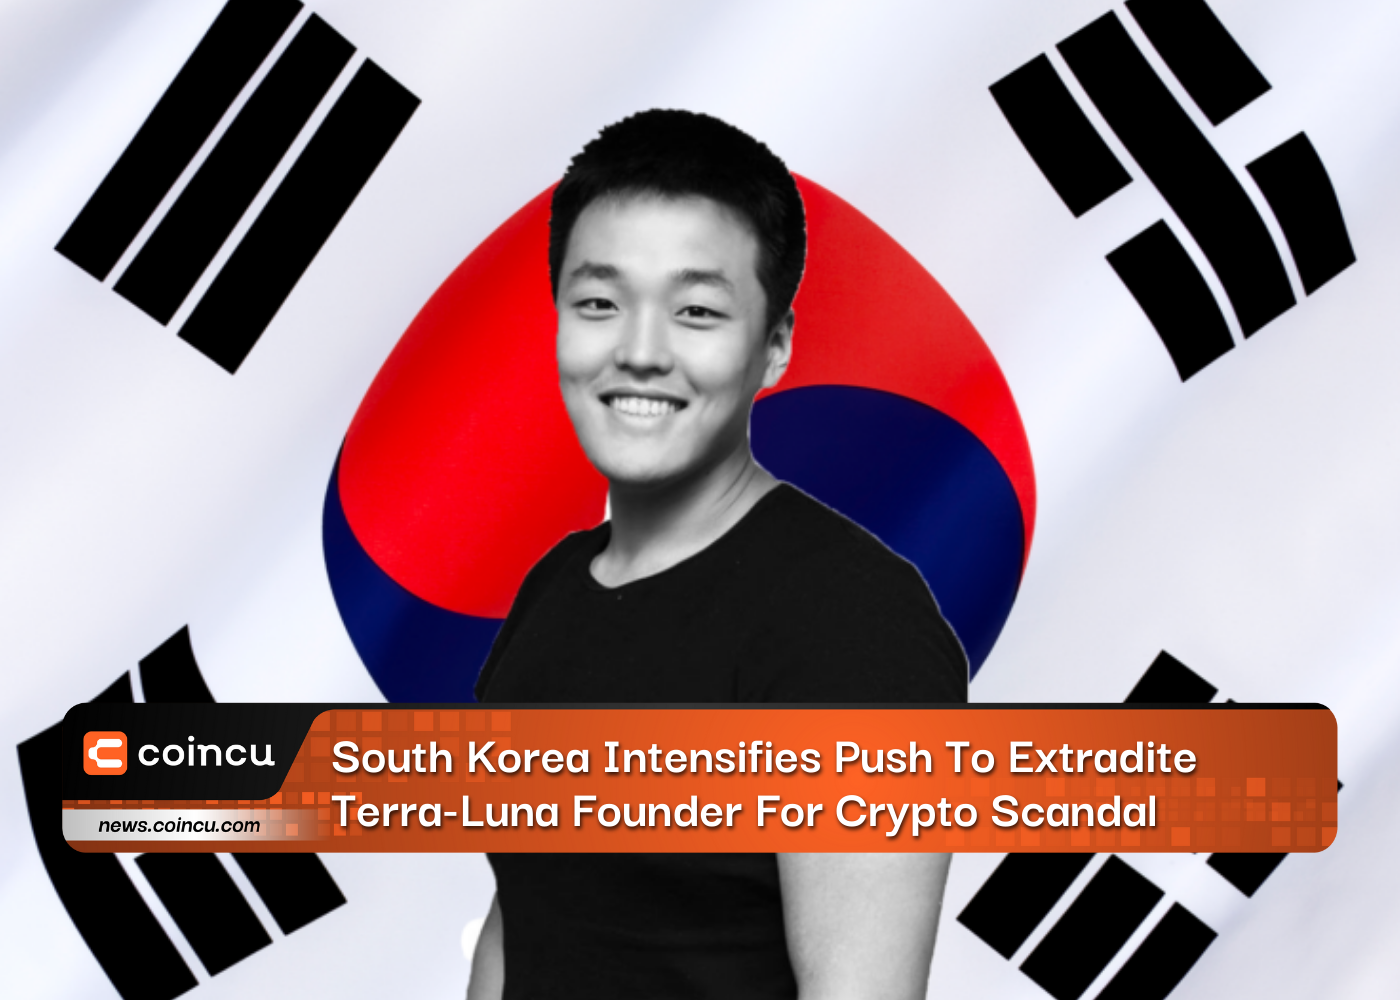 South Korea Intensifies Push To Extradite Terra-Luna Founder For Crypto Scandal